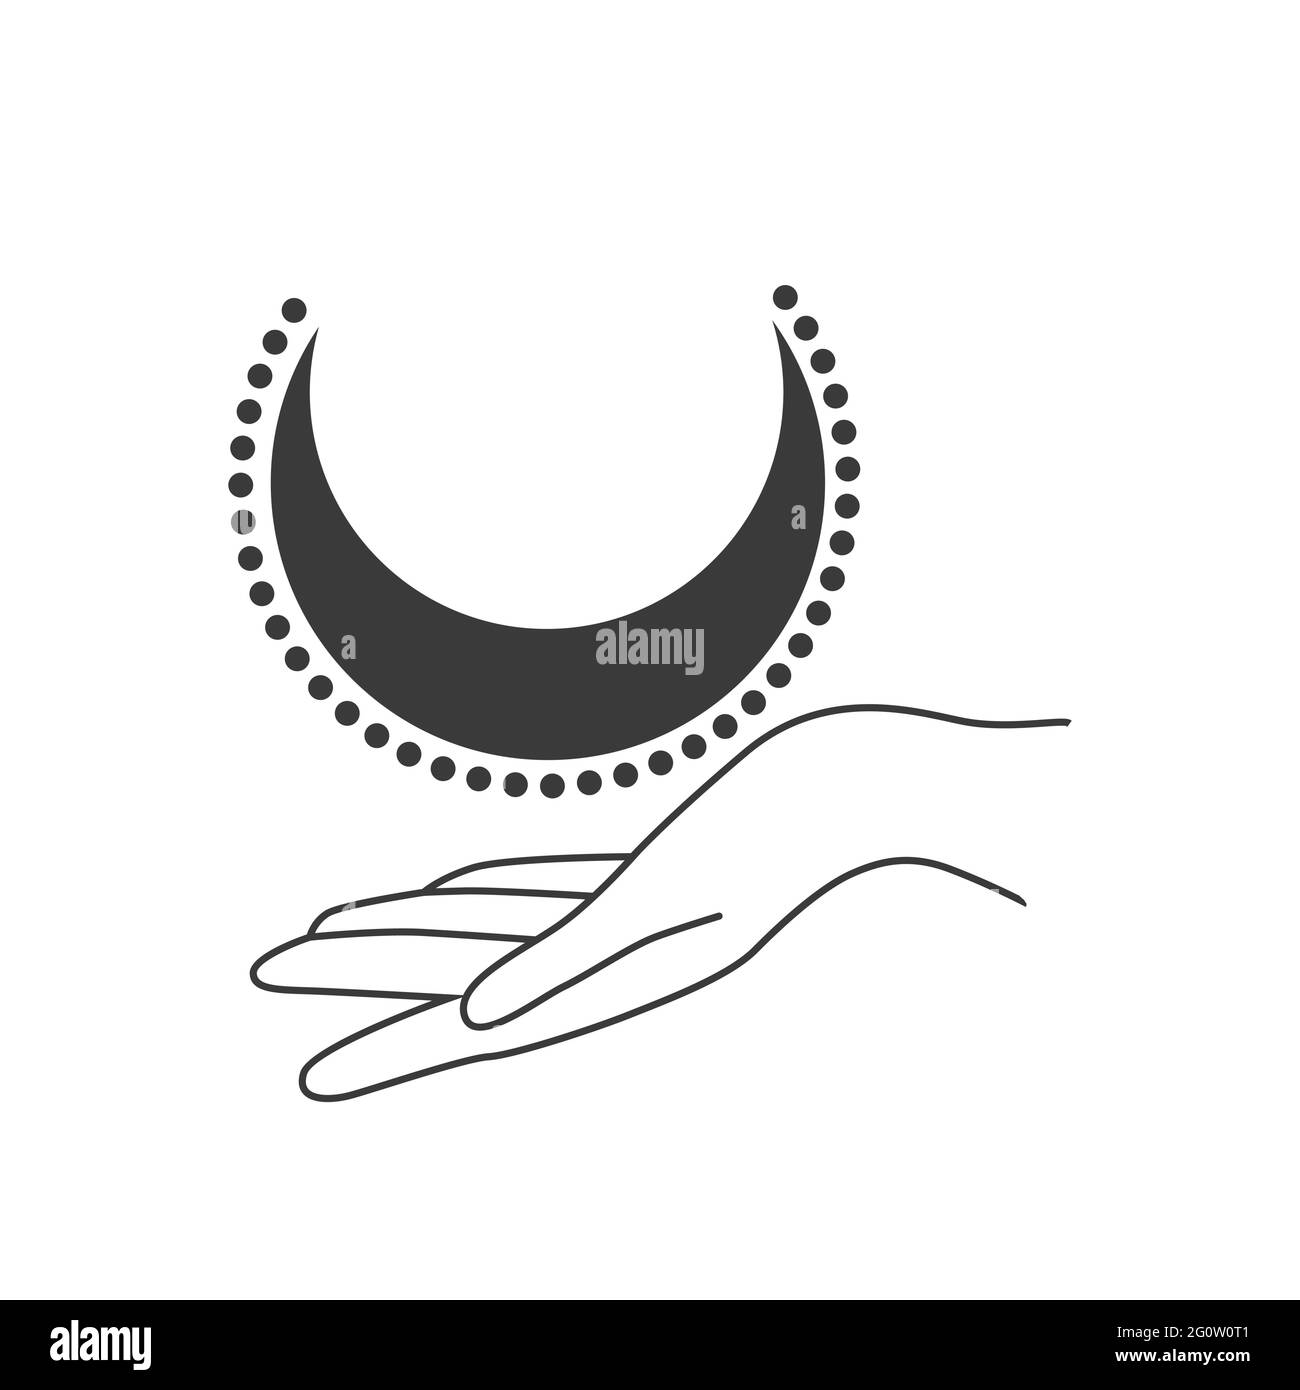 Esoteric symbol. Mystical and magical design with sun, hand, stars and moon. Stock Vector